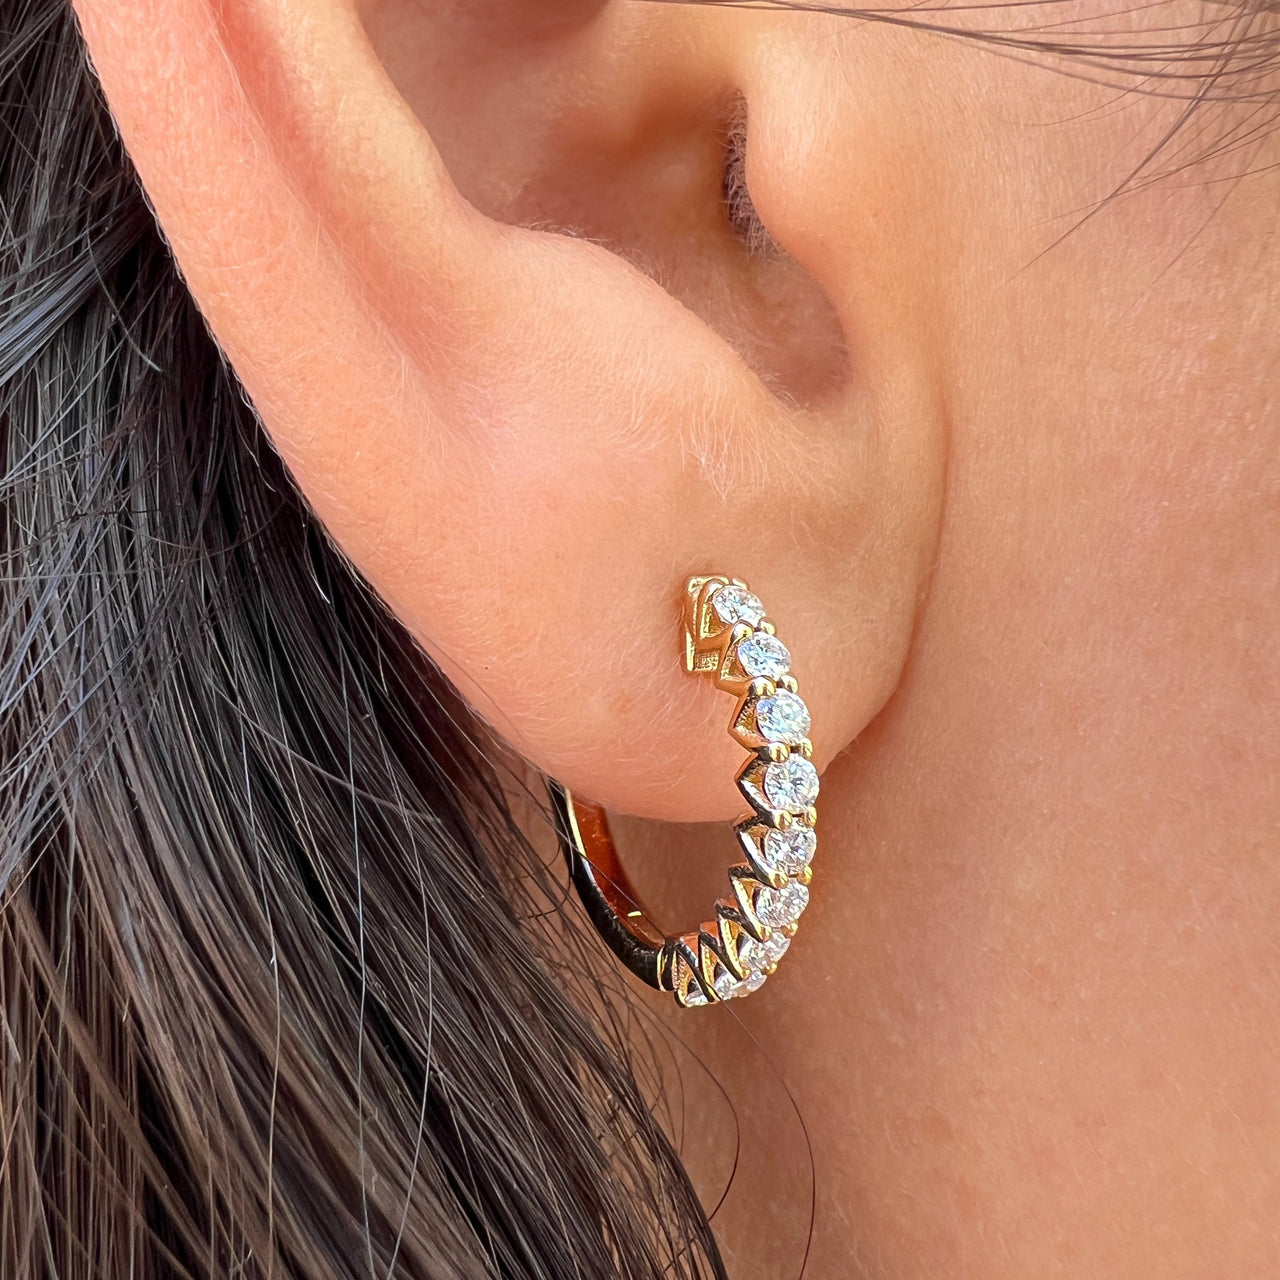 HOOP EARRING "ARCHES" WITH WHITE DIAMONDS / SOLID GOLD